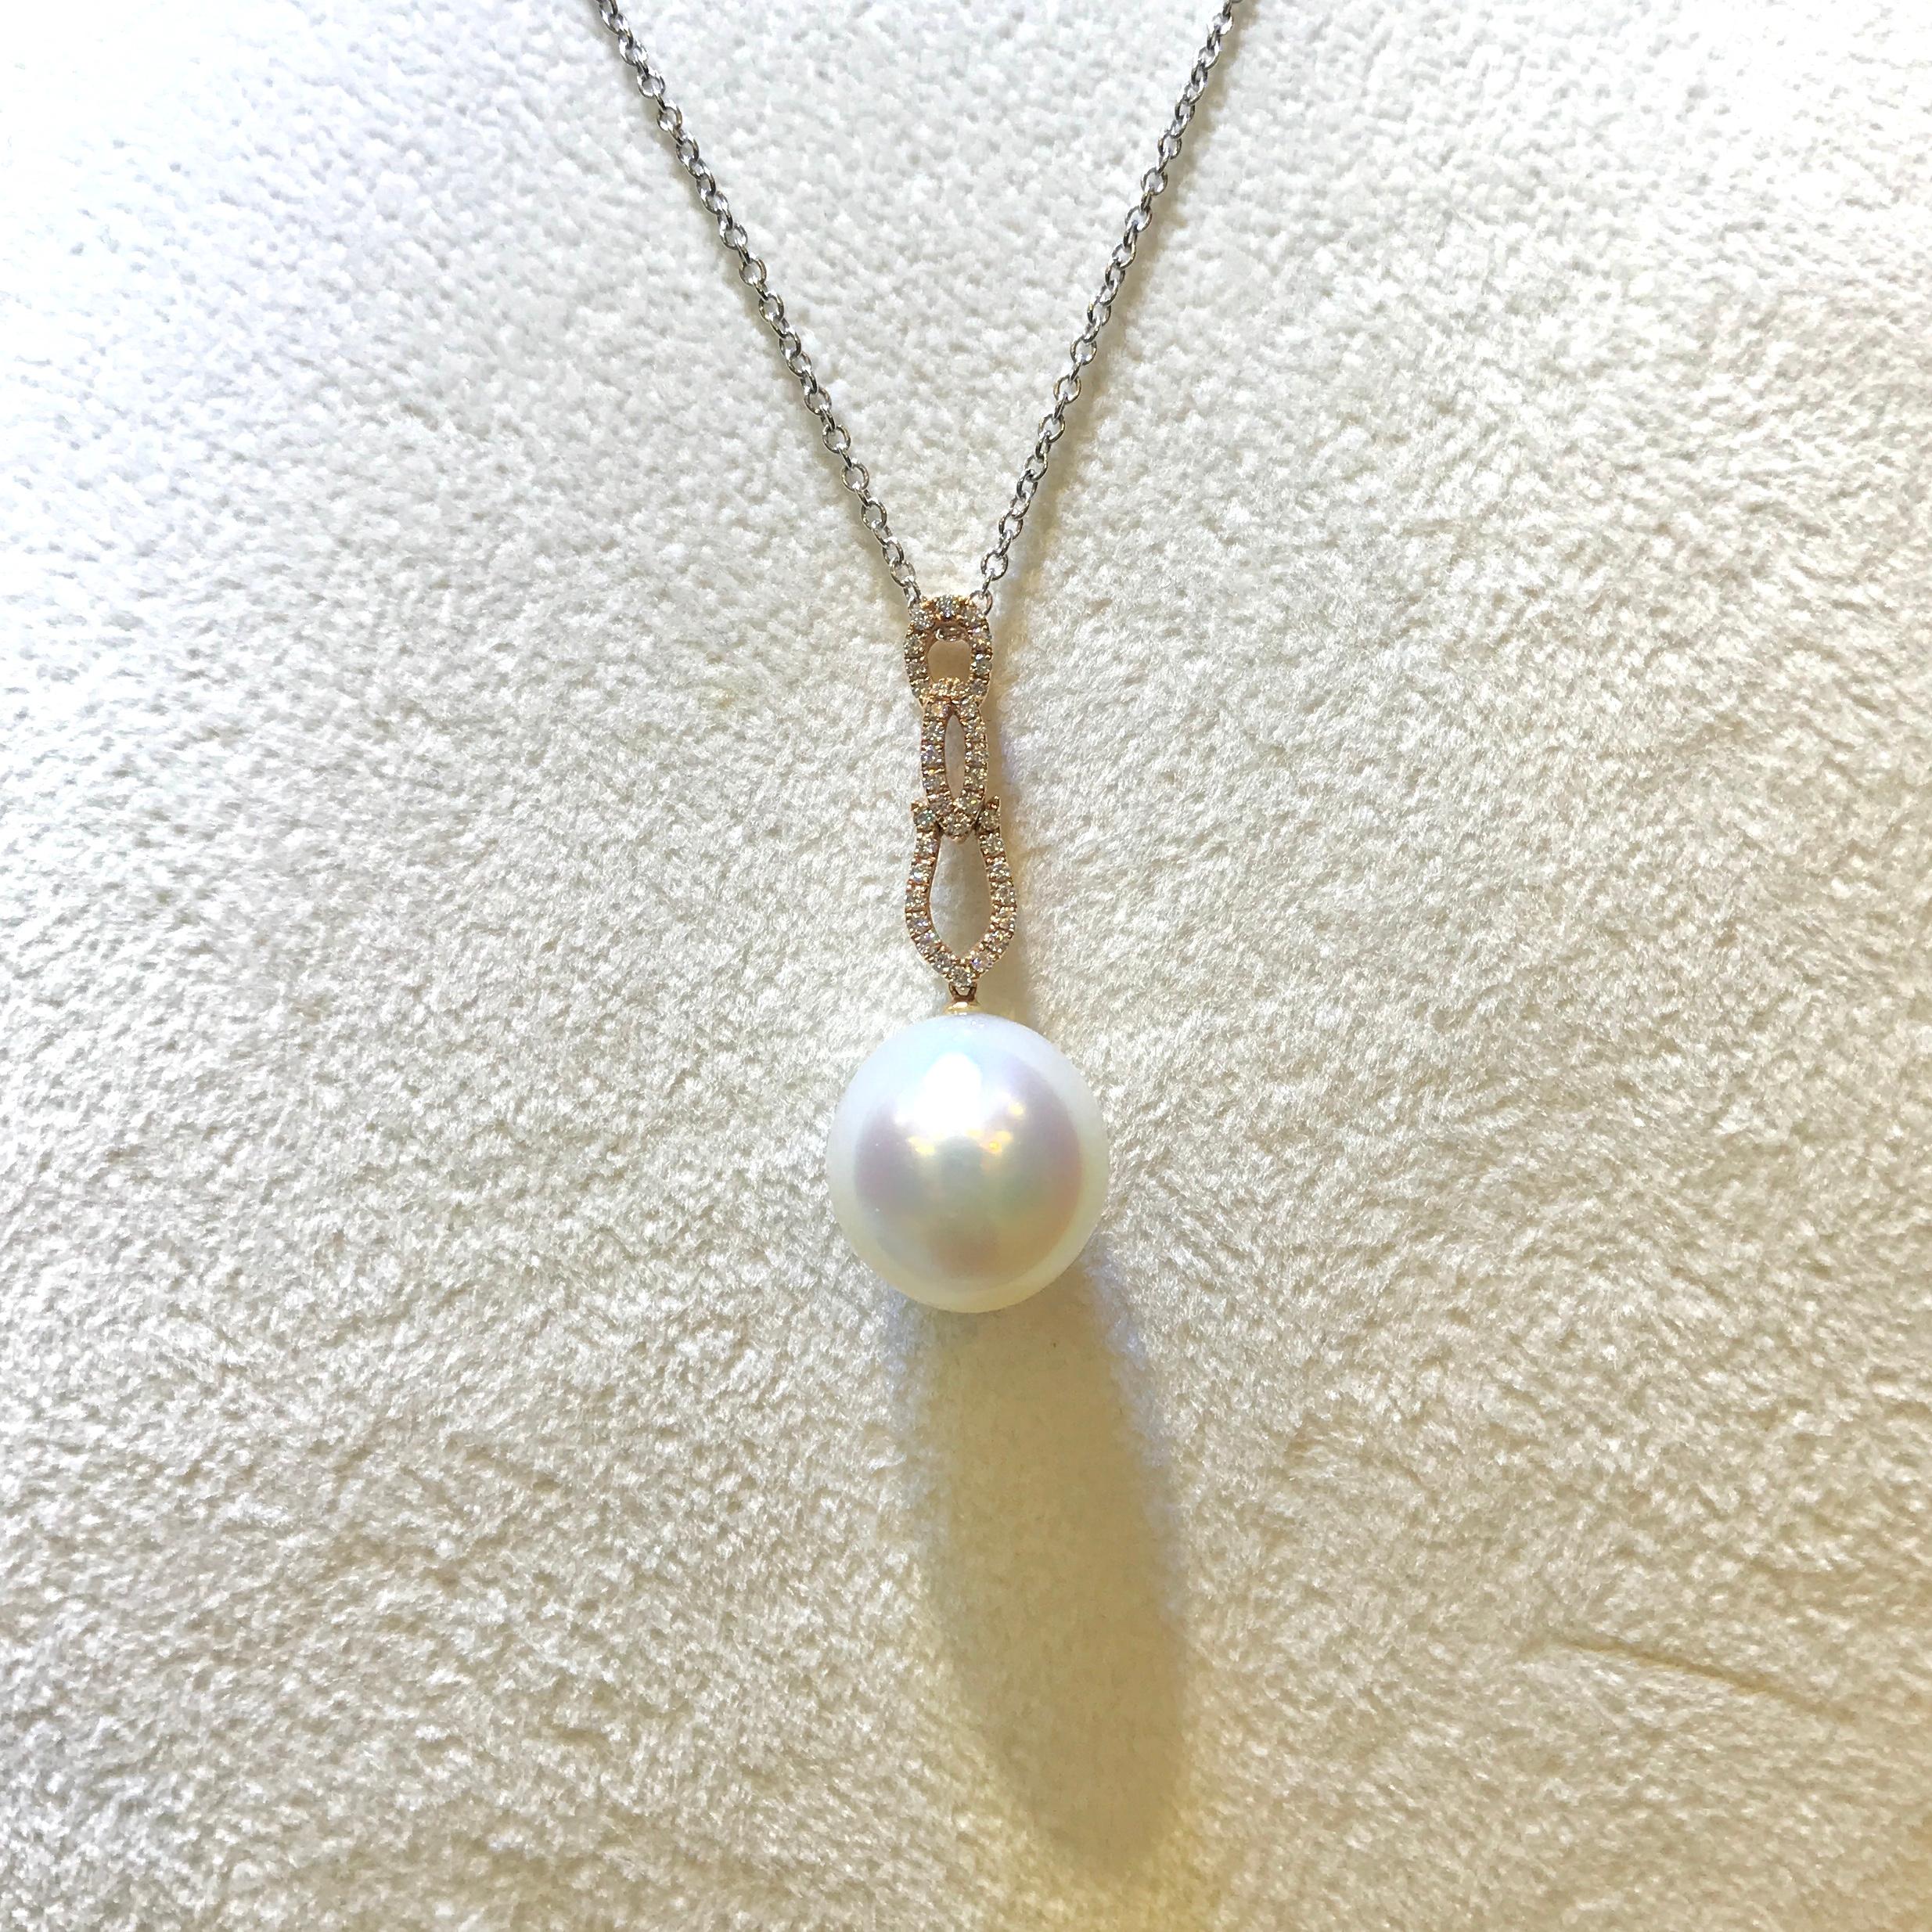 Simple and elegant Pink gold white south sea pearl diamond pendant, the pearl is pinkish overtone, sweet and tender. Natural blemishes on the pearl.

Height: 34.04 mm / Width: 5.54 mm / Depth: 2.57 mm / Southsea Pearl : 14.1 mm  x 14.8 mm
18 Karat